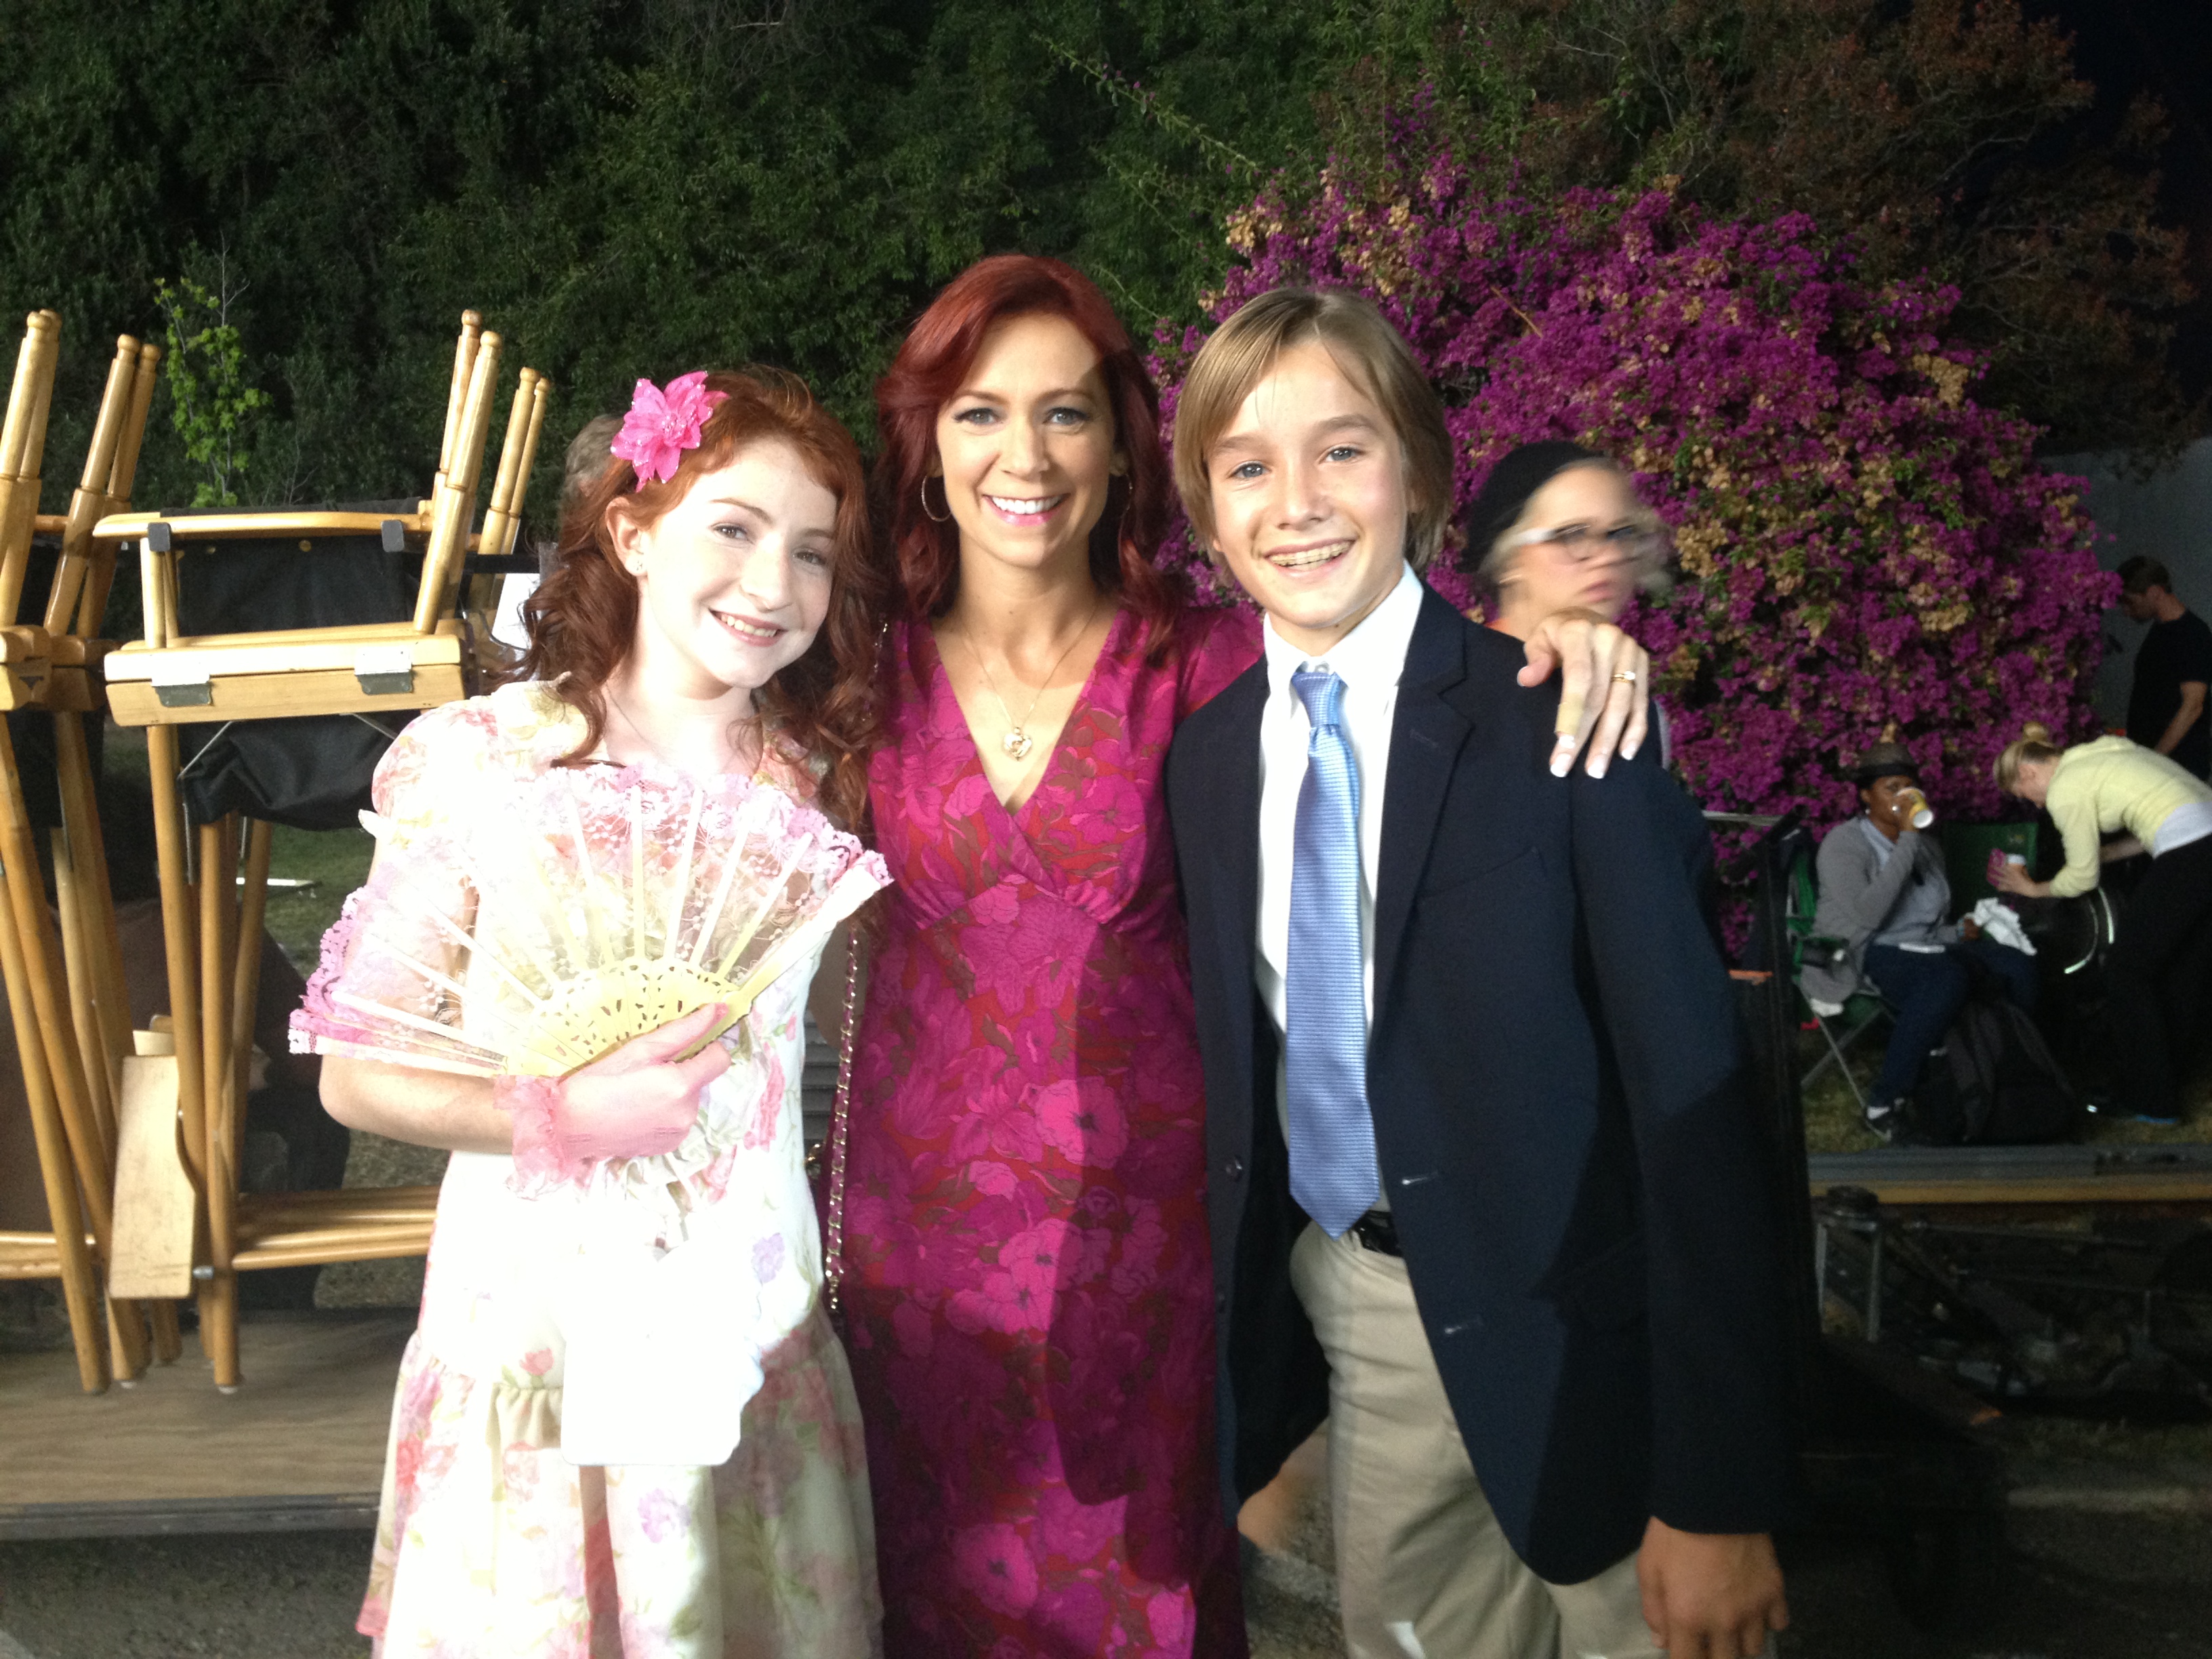 Alec Gray, Carrie Preston, and Laurel Webber on the Set of True Blood